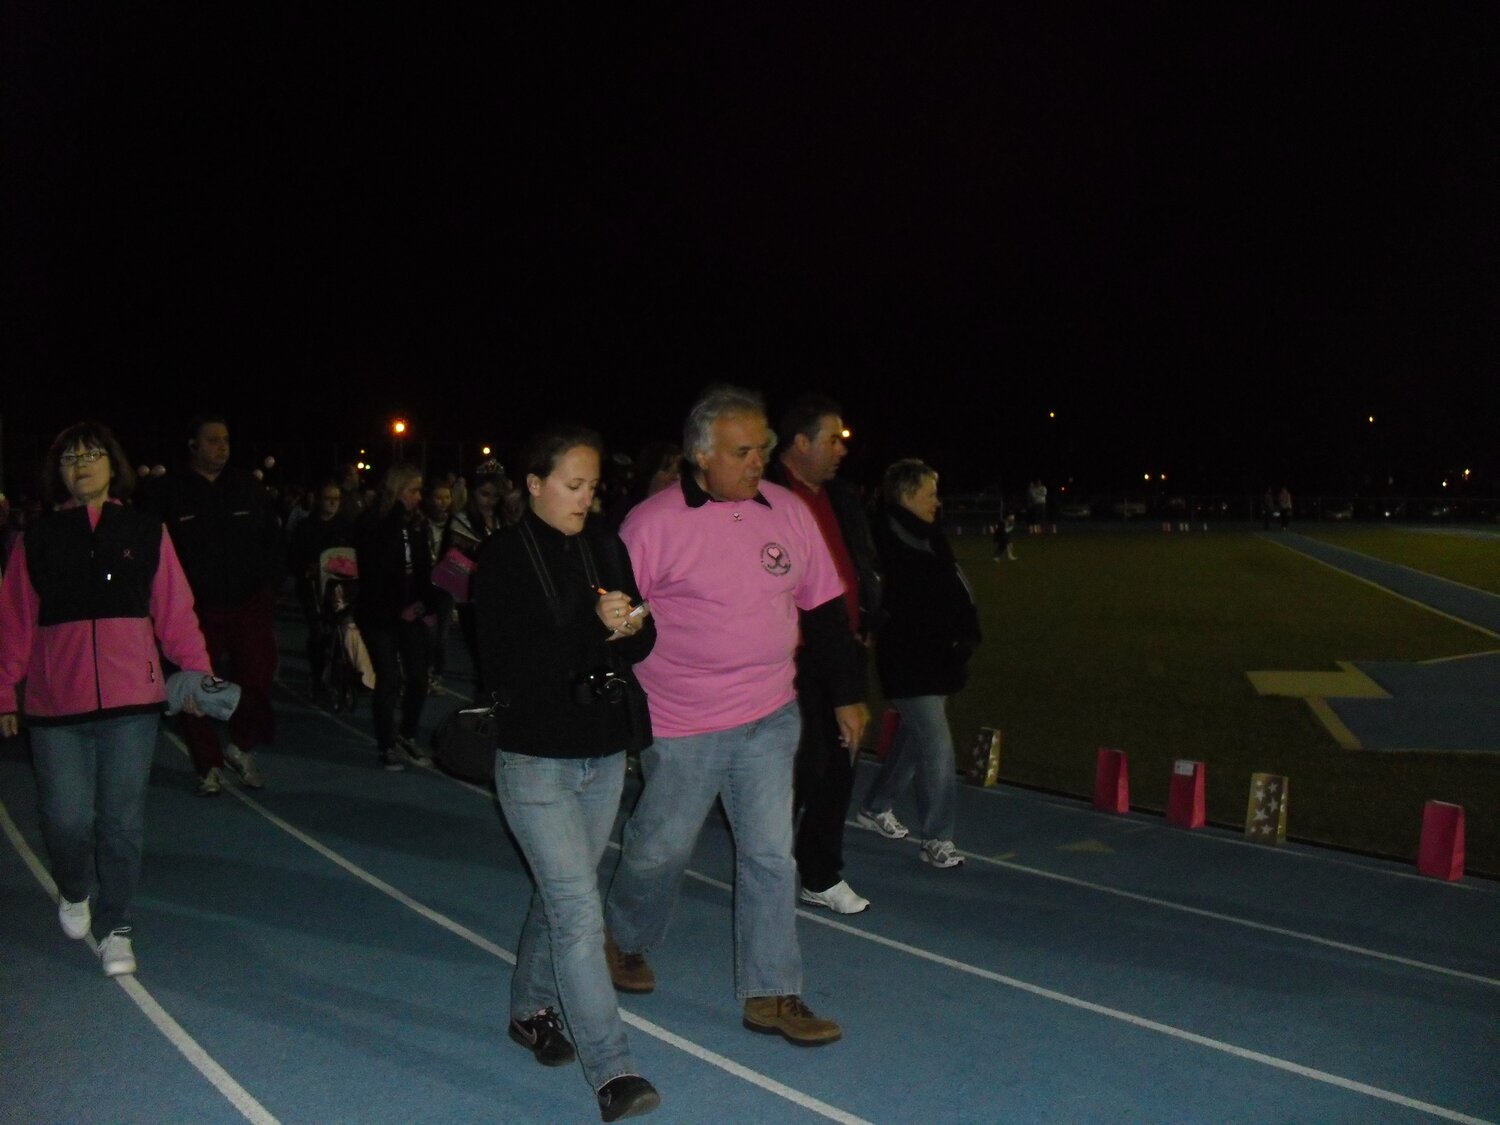 The Walk of Lights event was held at the Seaford High School in 2013. In front, Joe Satriano walked with those who had loved ones affected by cancer.